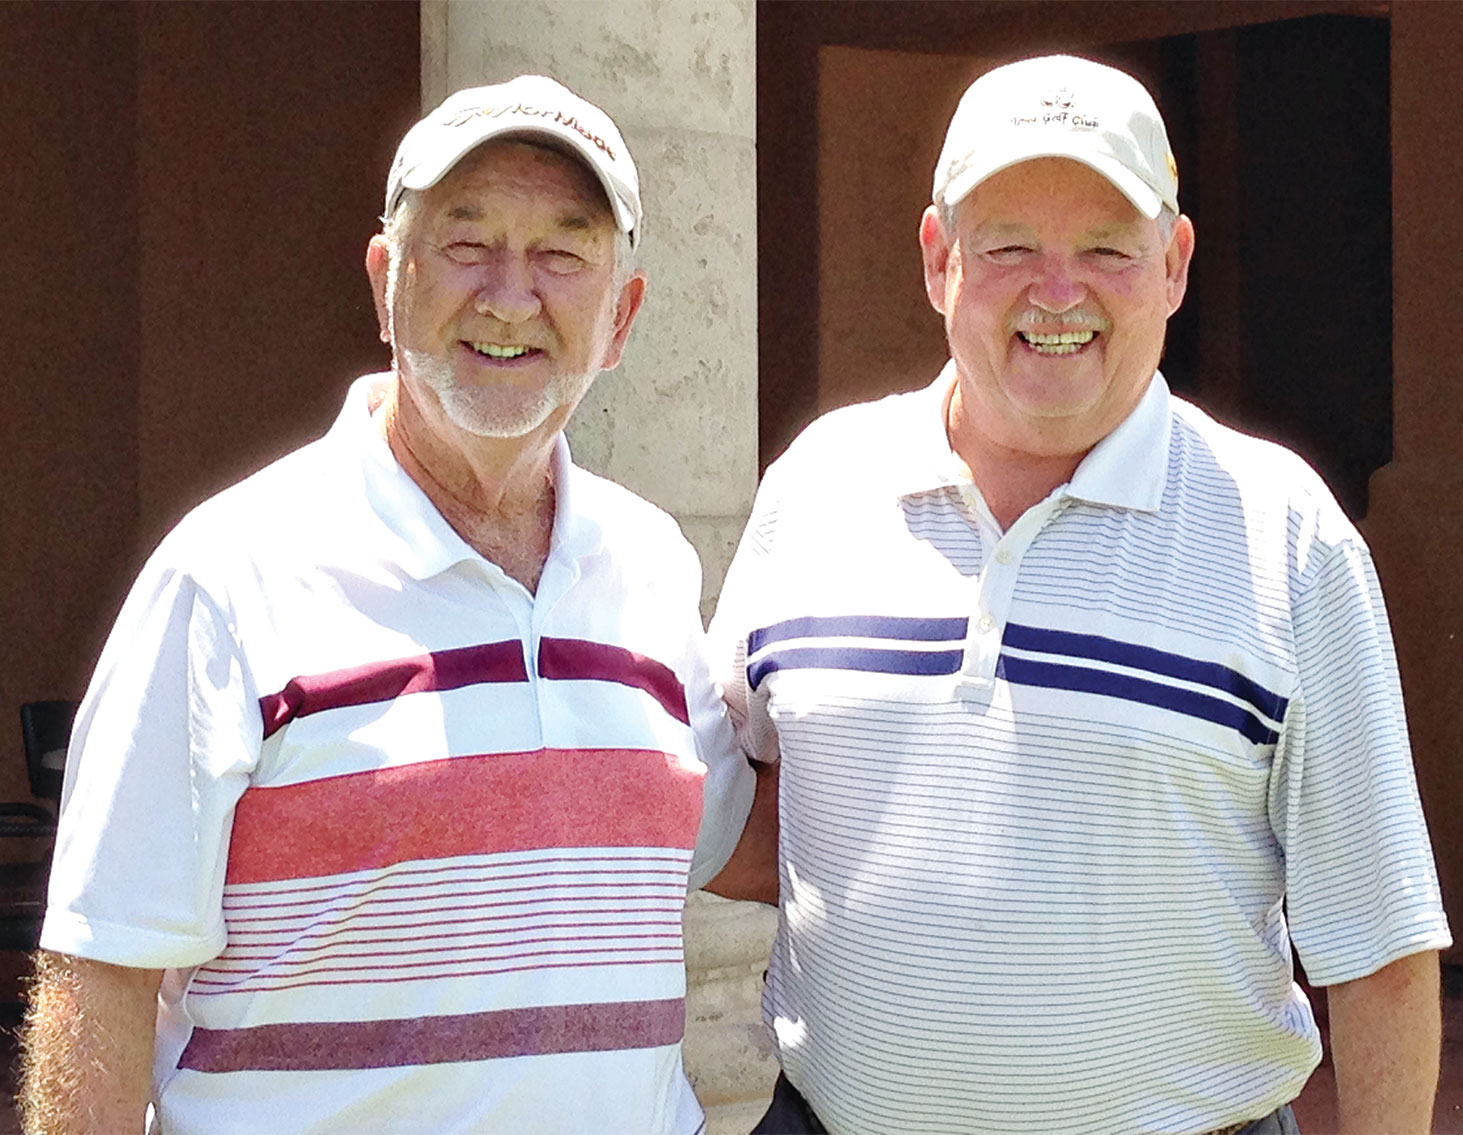 Flight Four winners Jim Muck (left) and Jim Stack